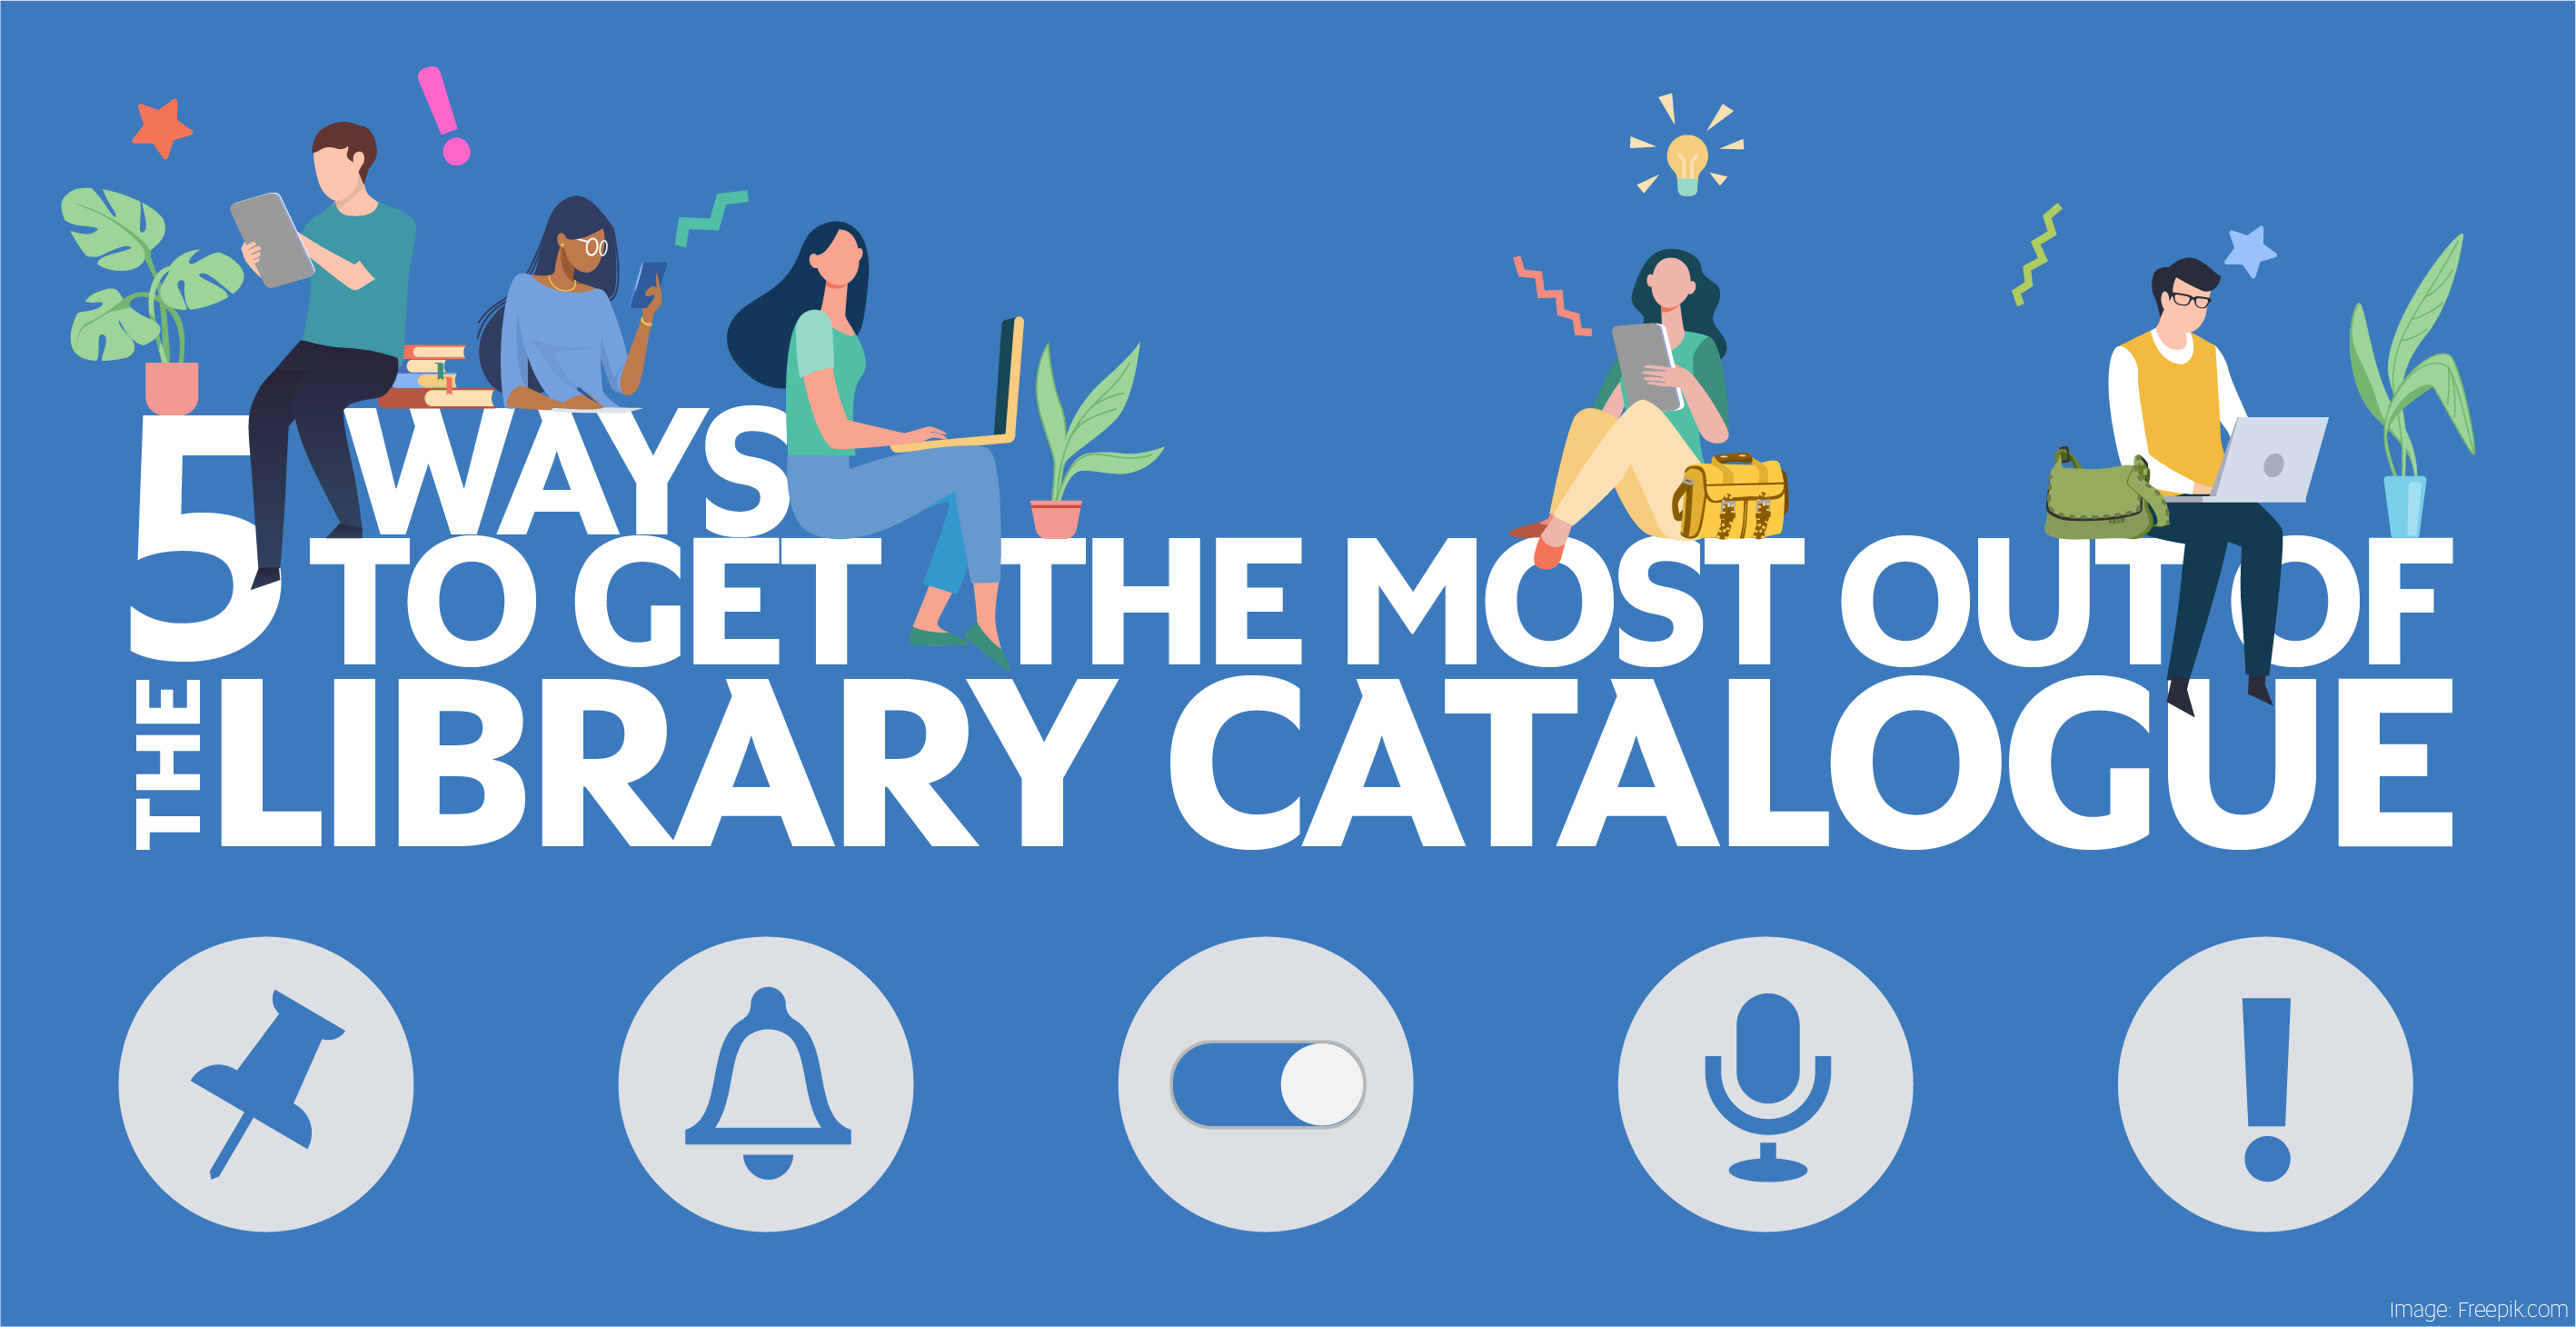 Cartoon graphic promoting '5 ways to get the most out of the library catalogue'